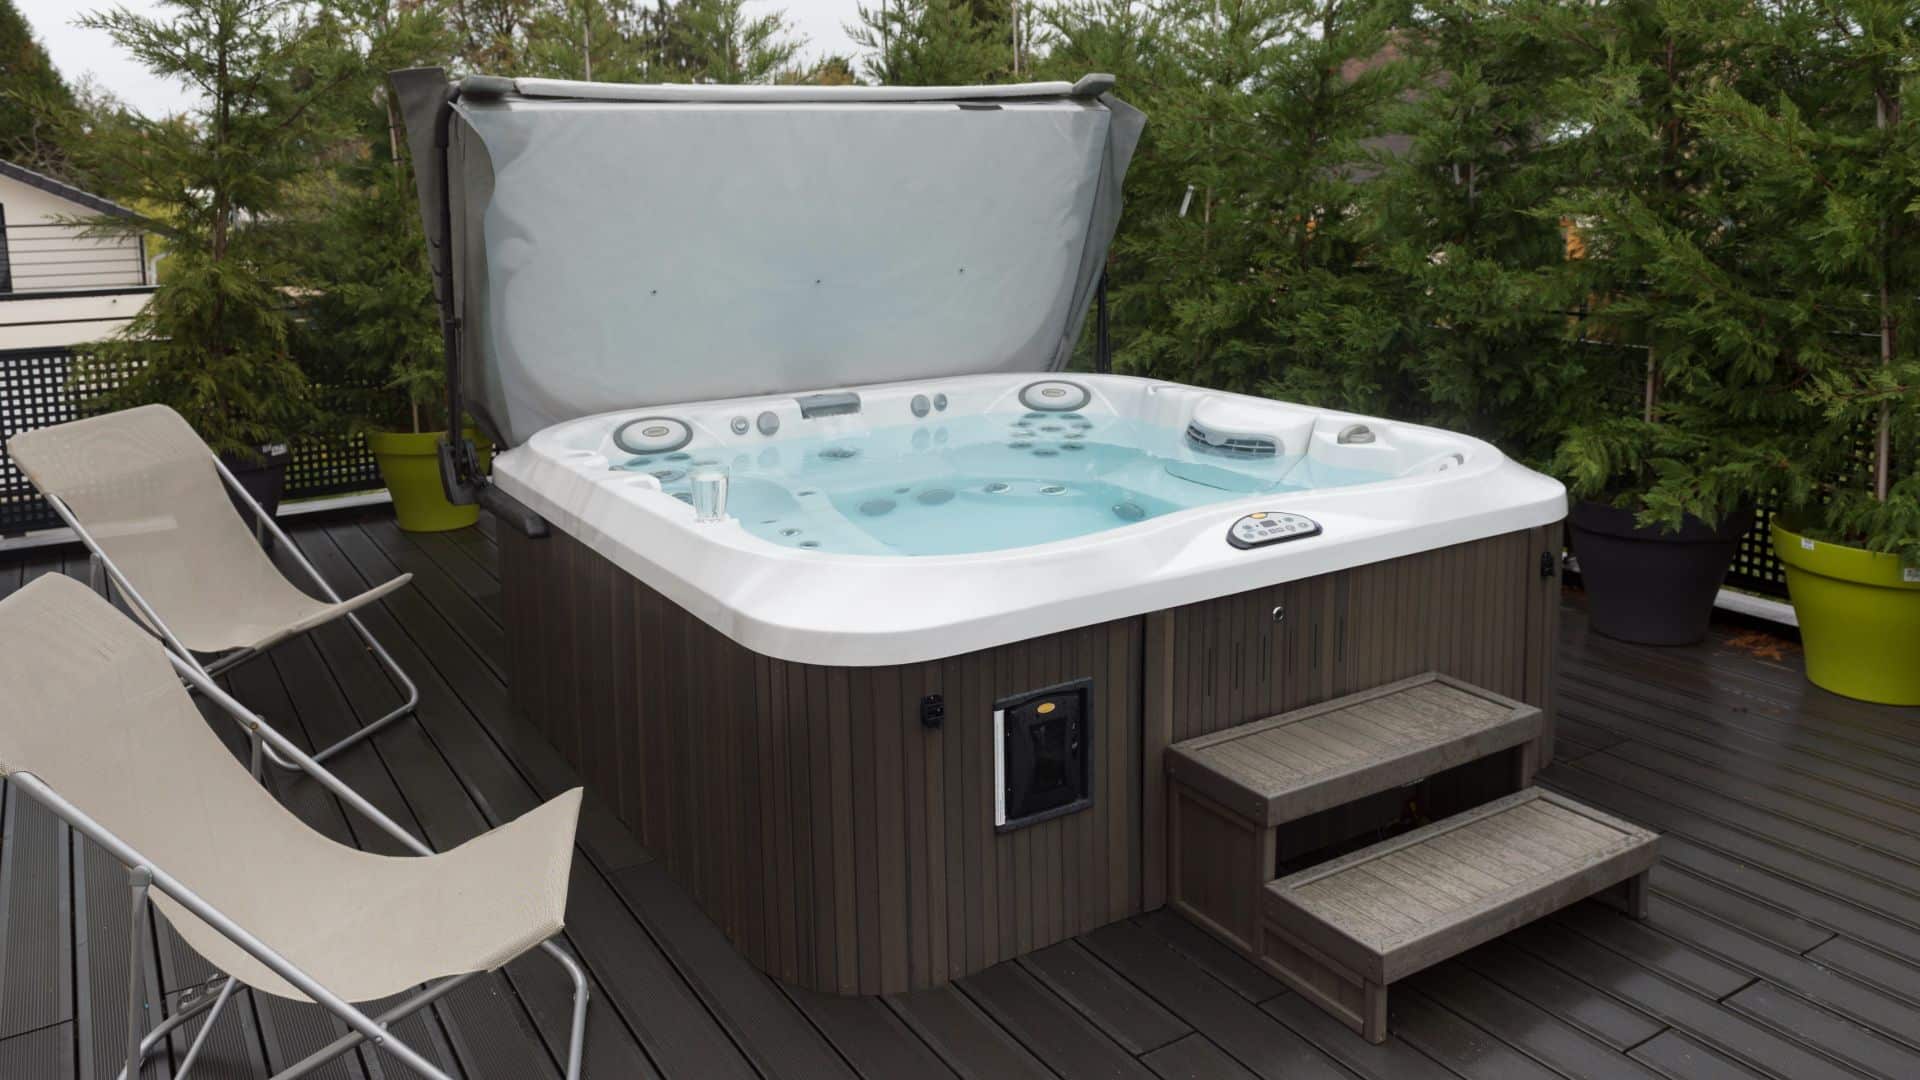 Jacuzzi vs. Hot Tub vs. Spa: What's the difference?